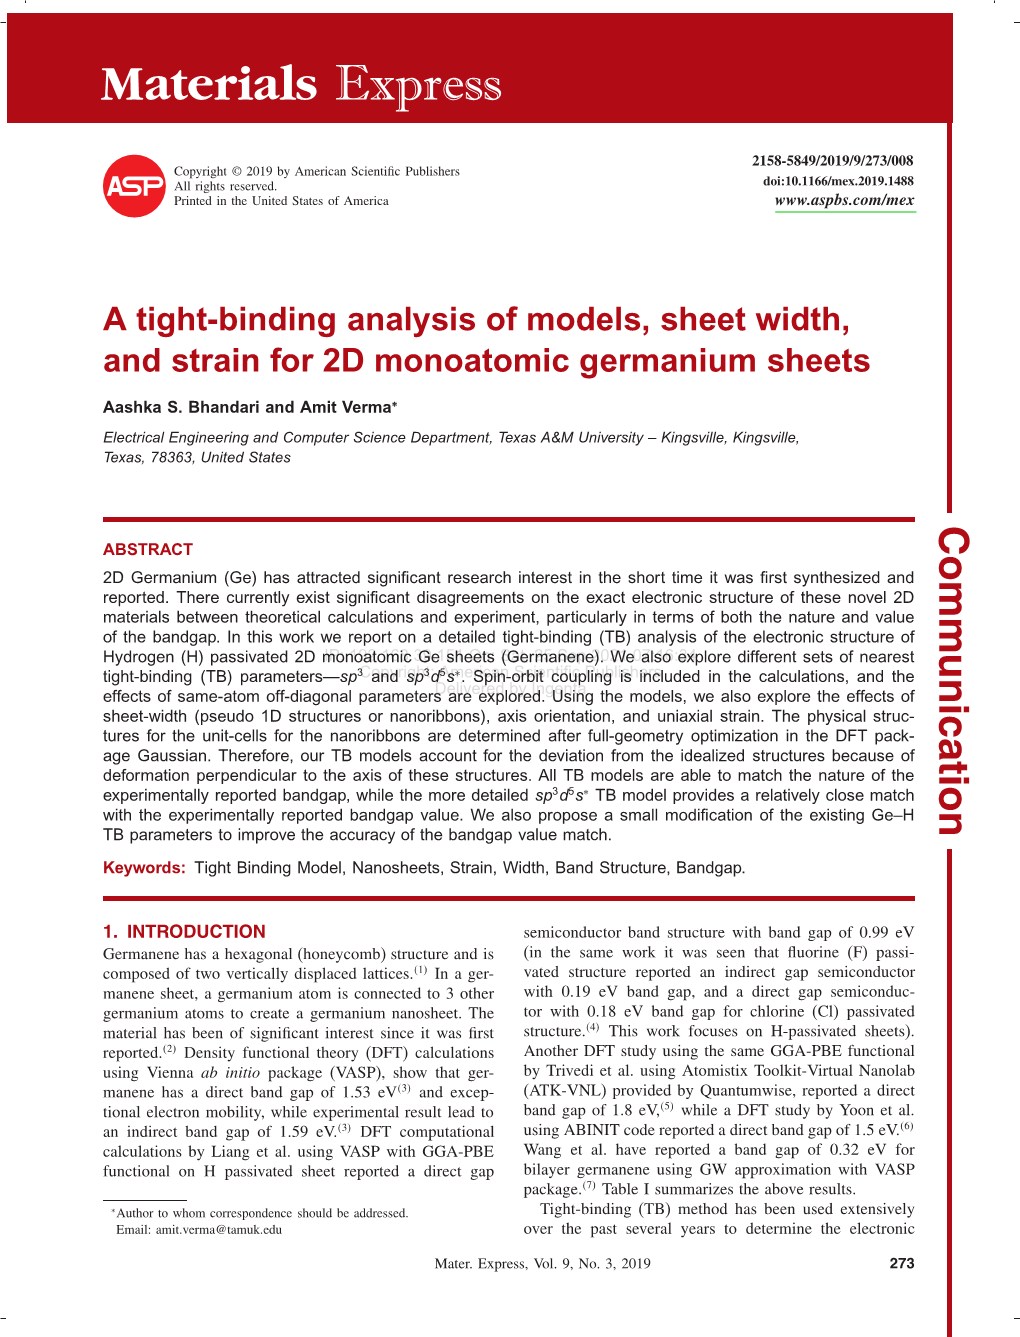 A Tight-Binding Analysis of Models, Sheet Width, and Strain for 2D Monoatomic Germanium Sheets